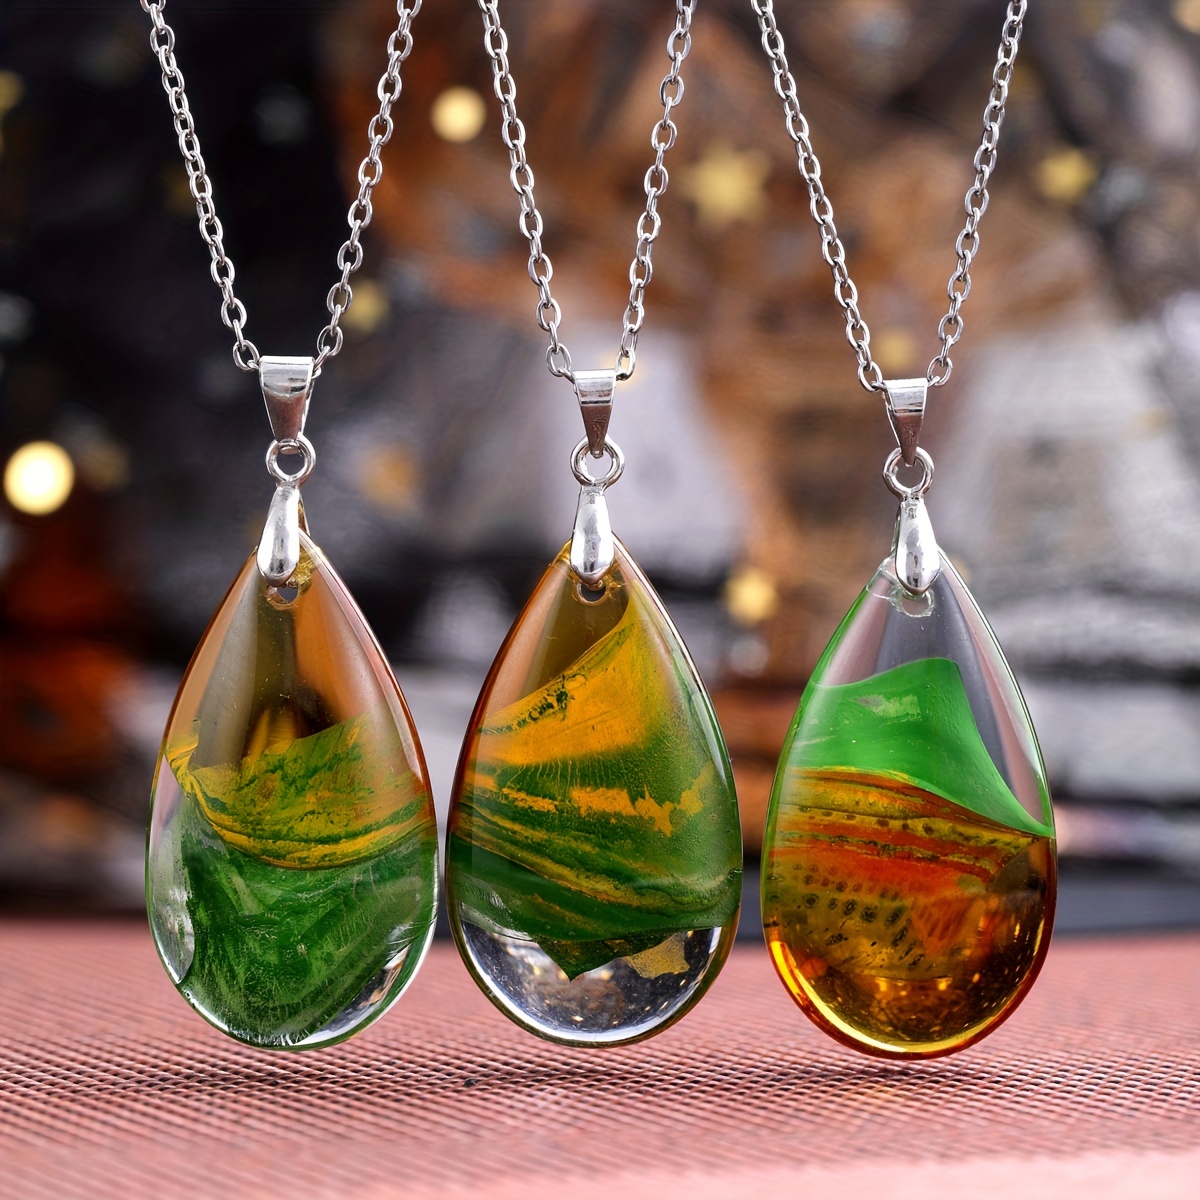 Flower Wrapped Crystal Necklaces